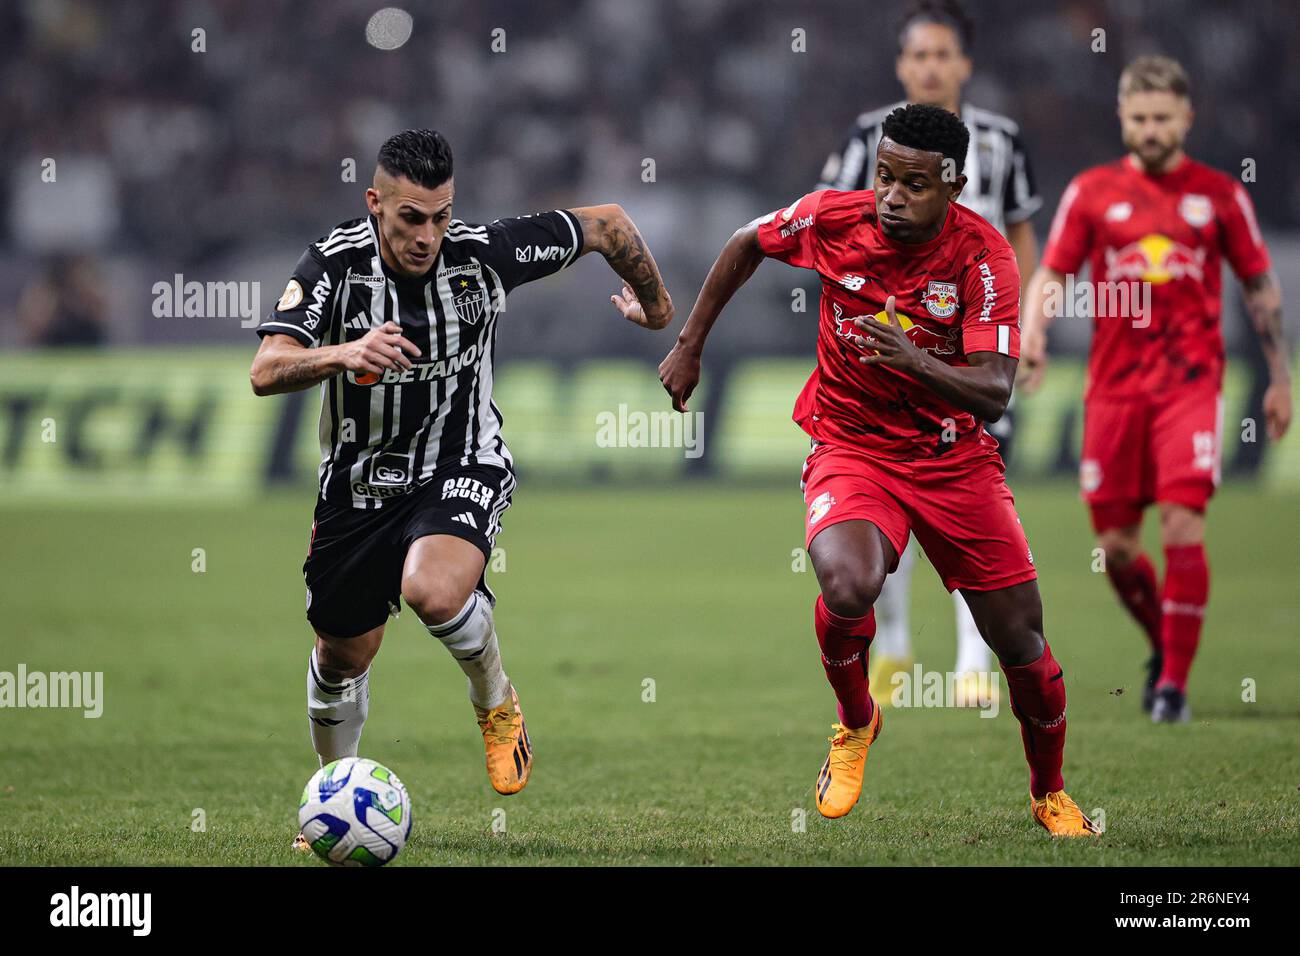 MG - BELO HORIZONTE - 06/10/2023 - BRAZILEIRO A 2023, ATLETICO-MG X RED BULL BRAZIL - Pavon player from Atletico-MG competes with Eduardo Santos player from Red Bull Brasil during a match at the Mineirao stadium for the BRAZILIAN A 2023 championship. Photo: Gilson Junio/AGIF/Sipa USA Stock Photo